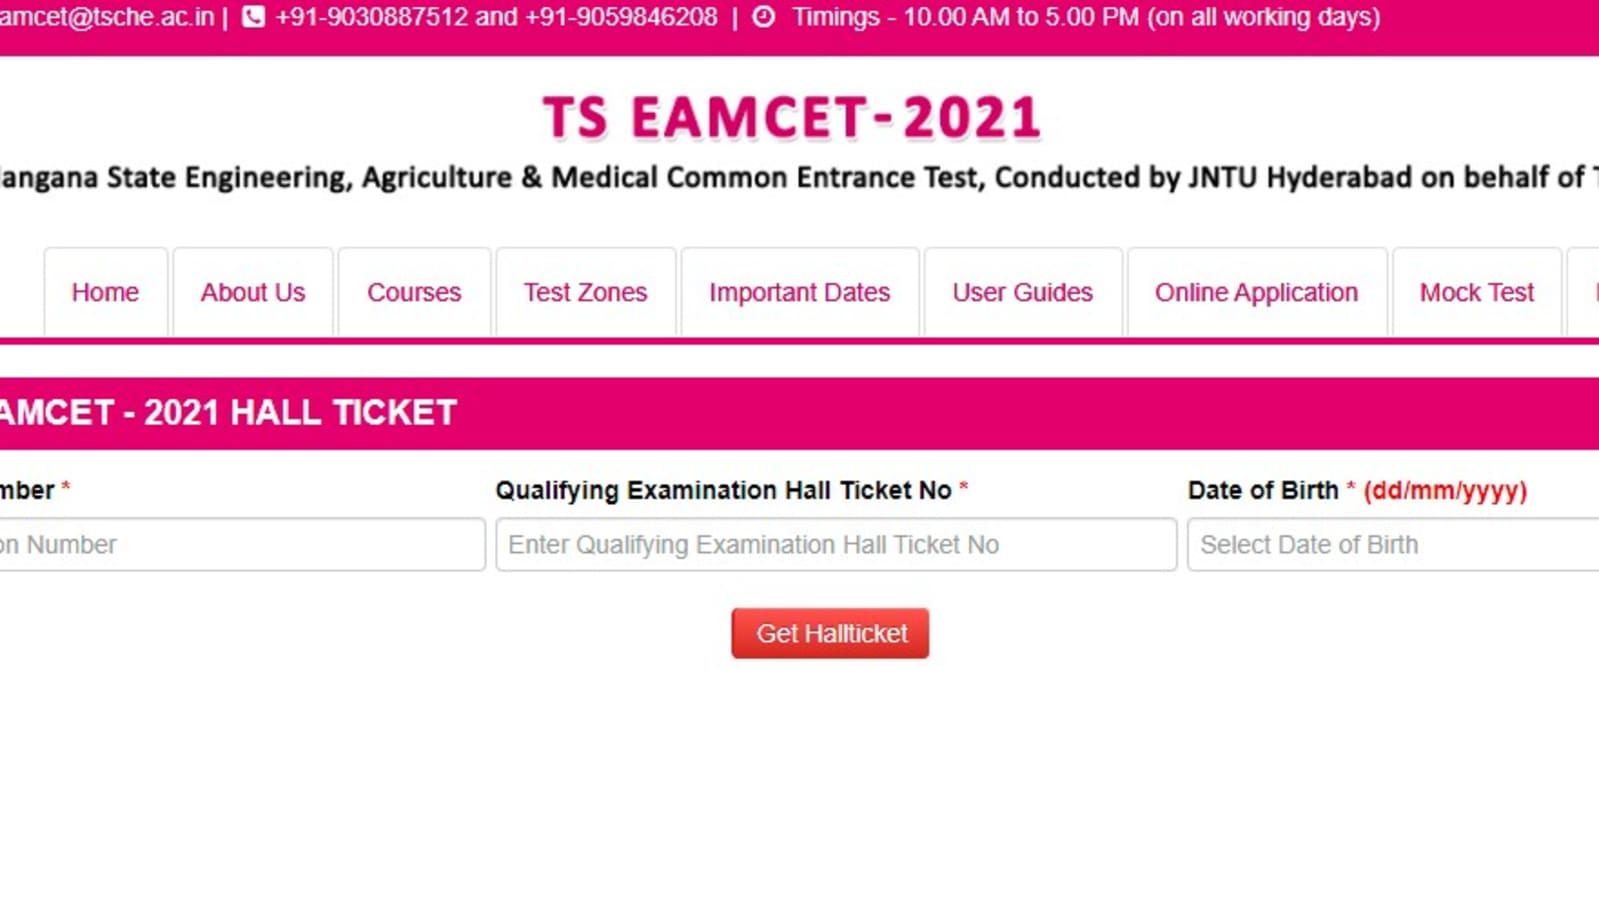 TS EAMCET Hall Ticket 2021 released at eamcet.tsche.ac.in, link for